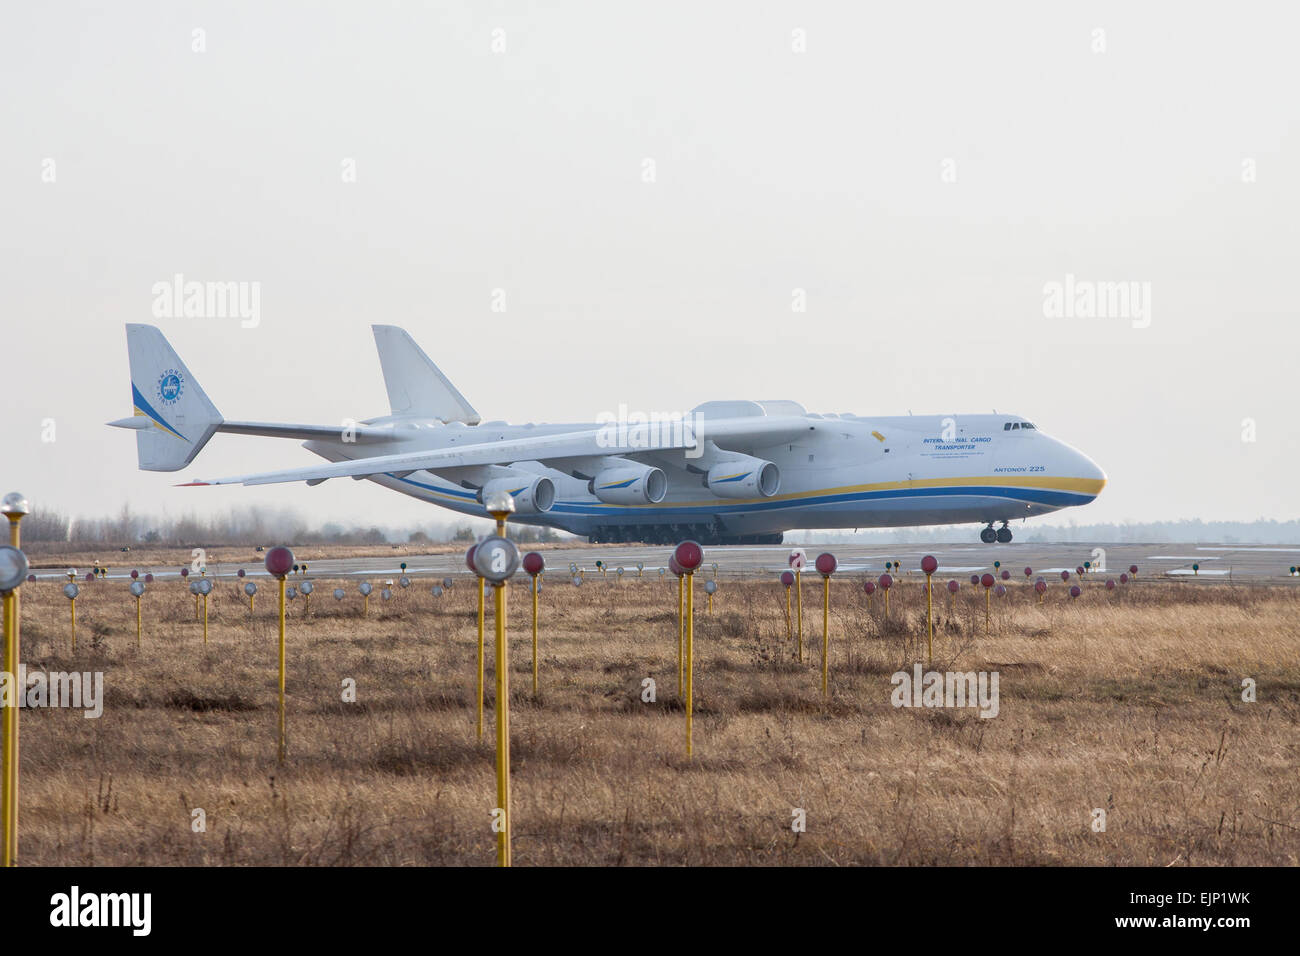 Kiev, Ukraine - January 5, 2012: Antonov-225 - the largest cargo plane in the world on the runway in the airport Stock Photo